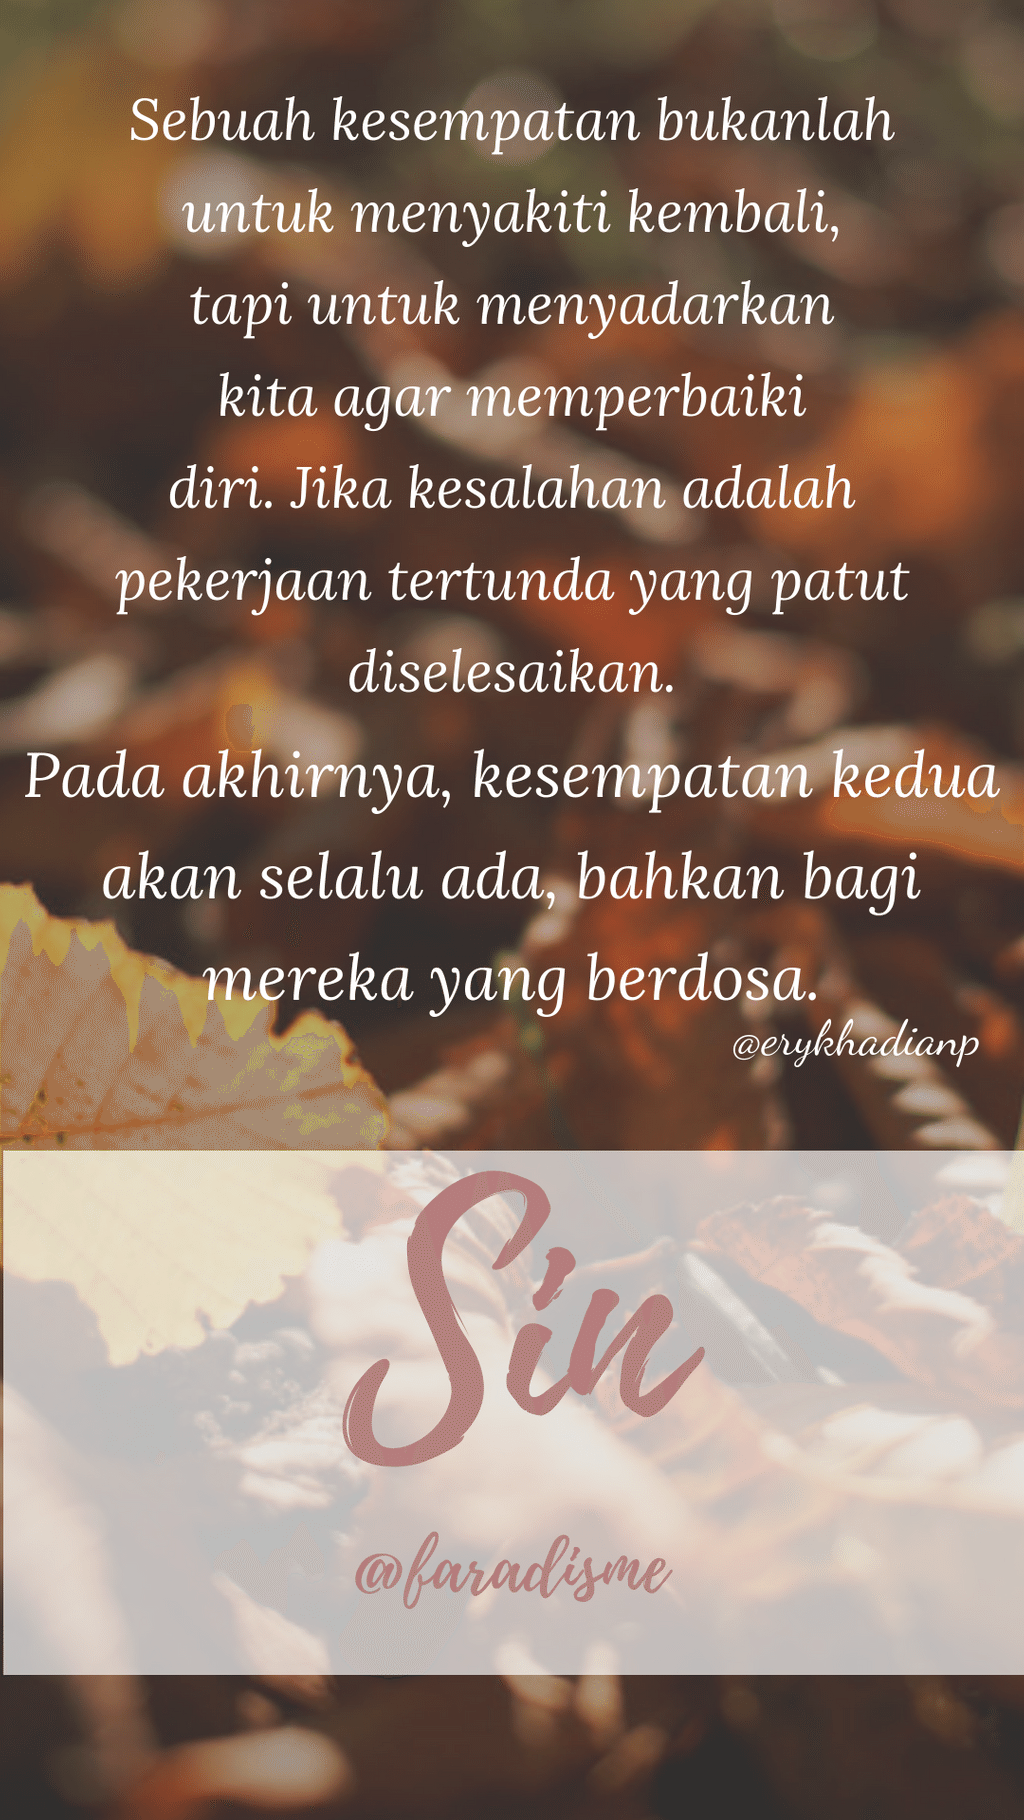 Quotes Film Sin Indonesia - HD Wallpaper 